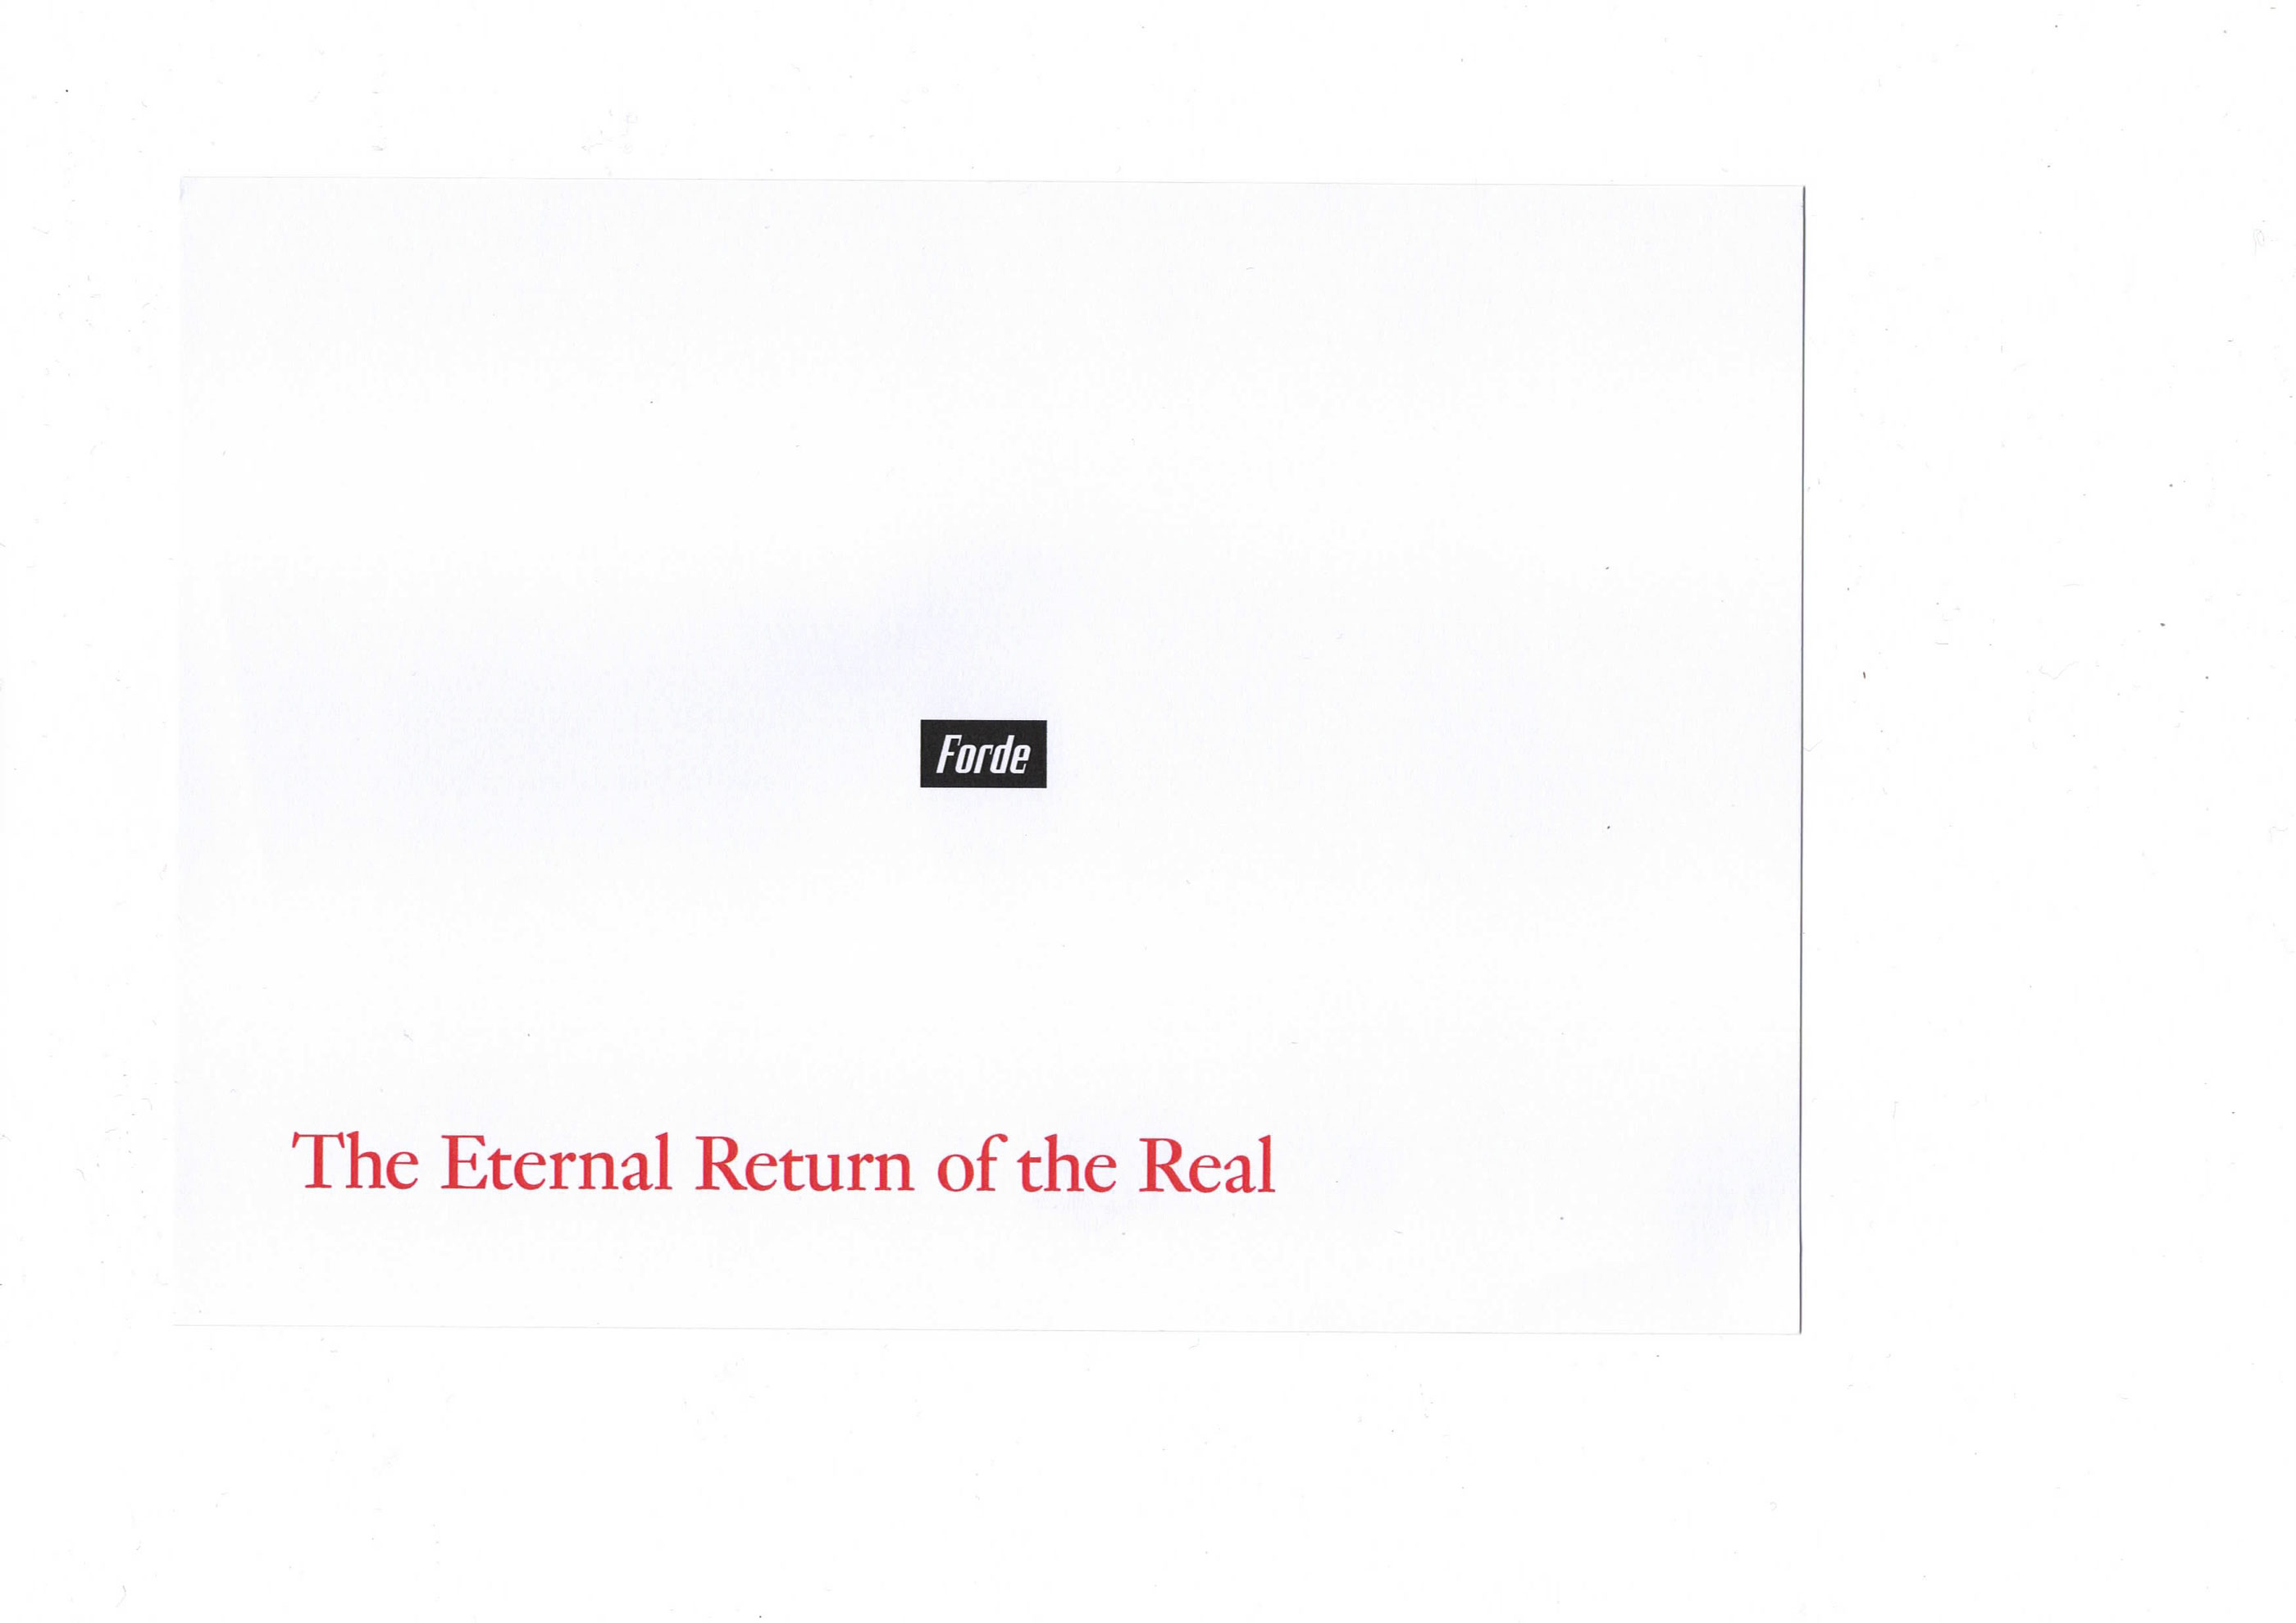 forde - flyer - The Eternal Return of the Real